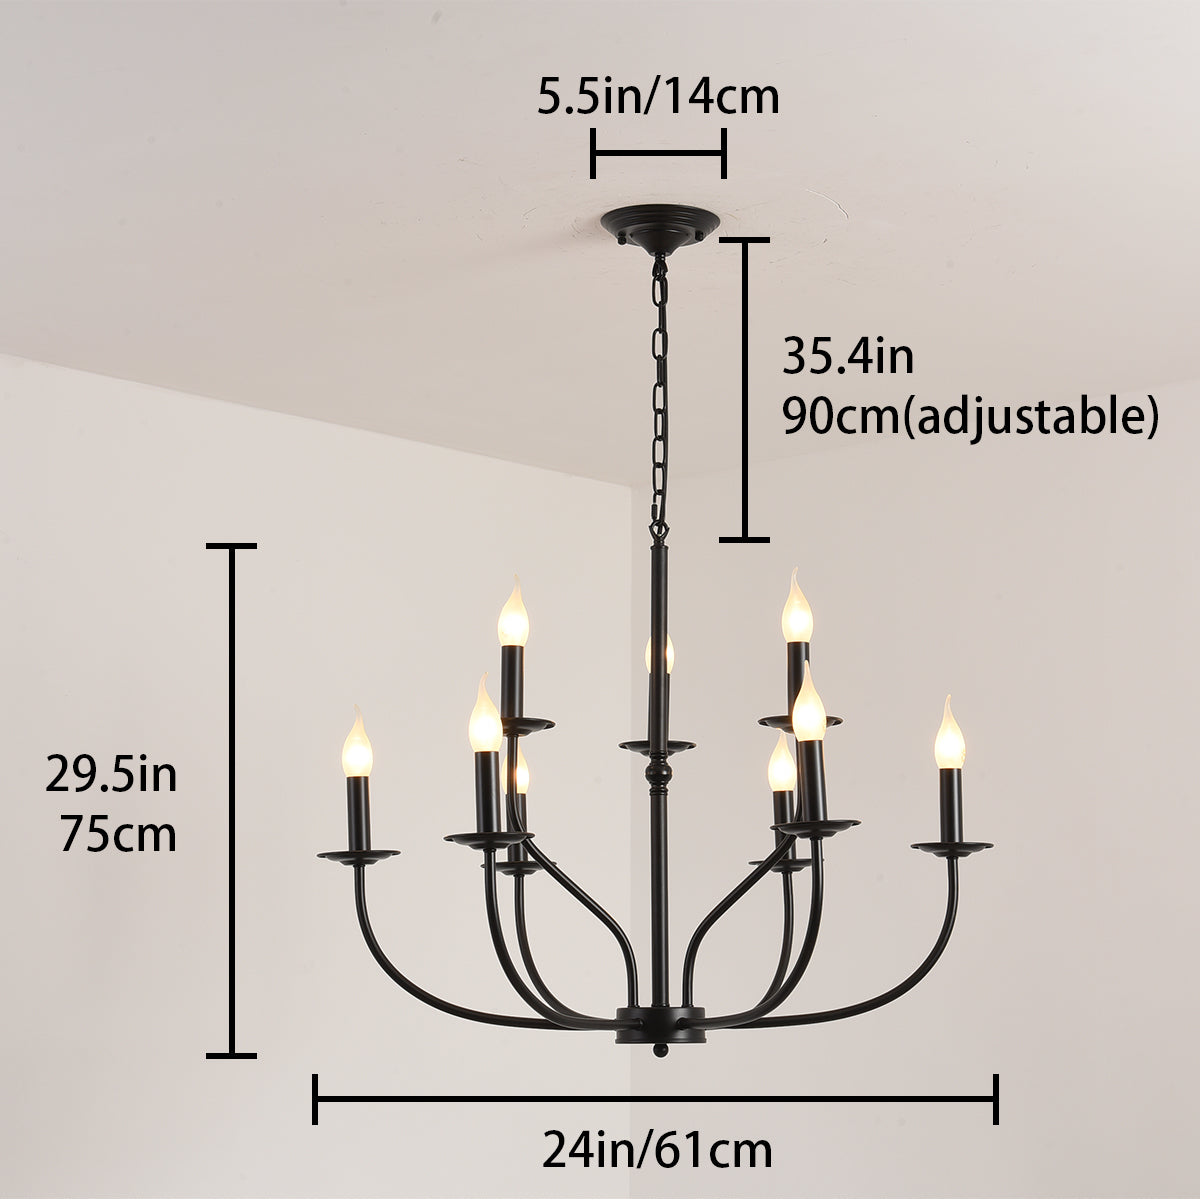 Dimensions of classic black chandelier